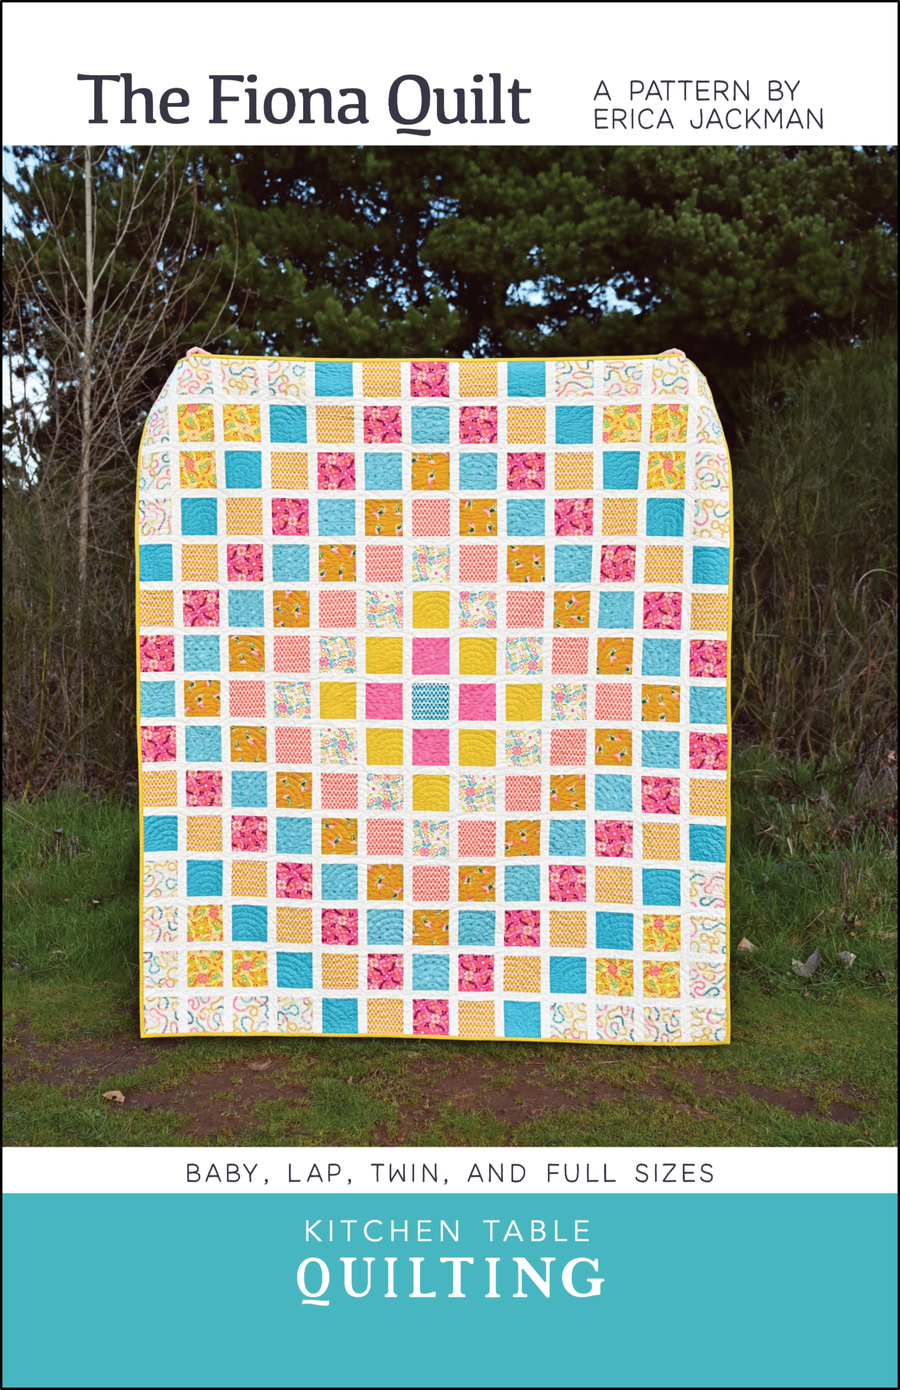 The Fiona Quilt Pattern Coloring Sheet